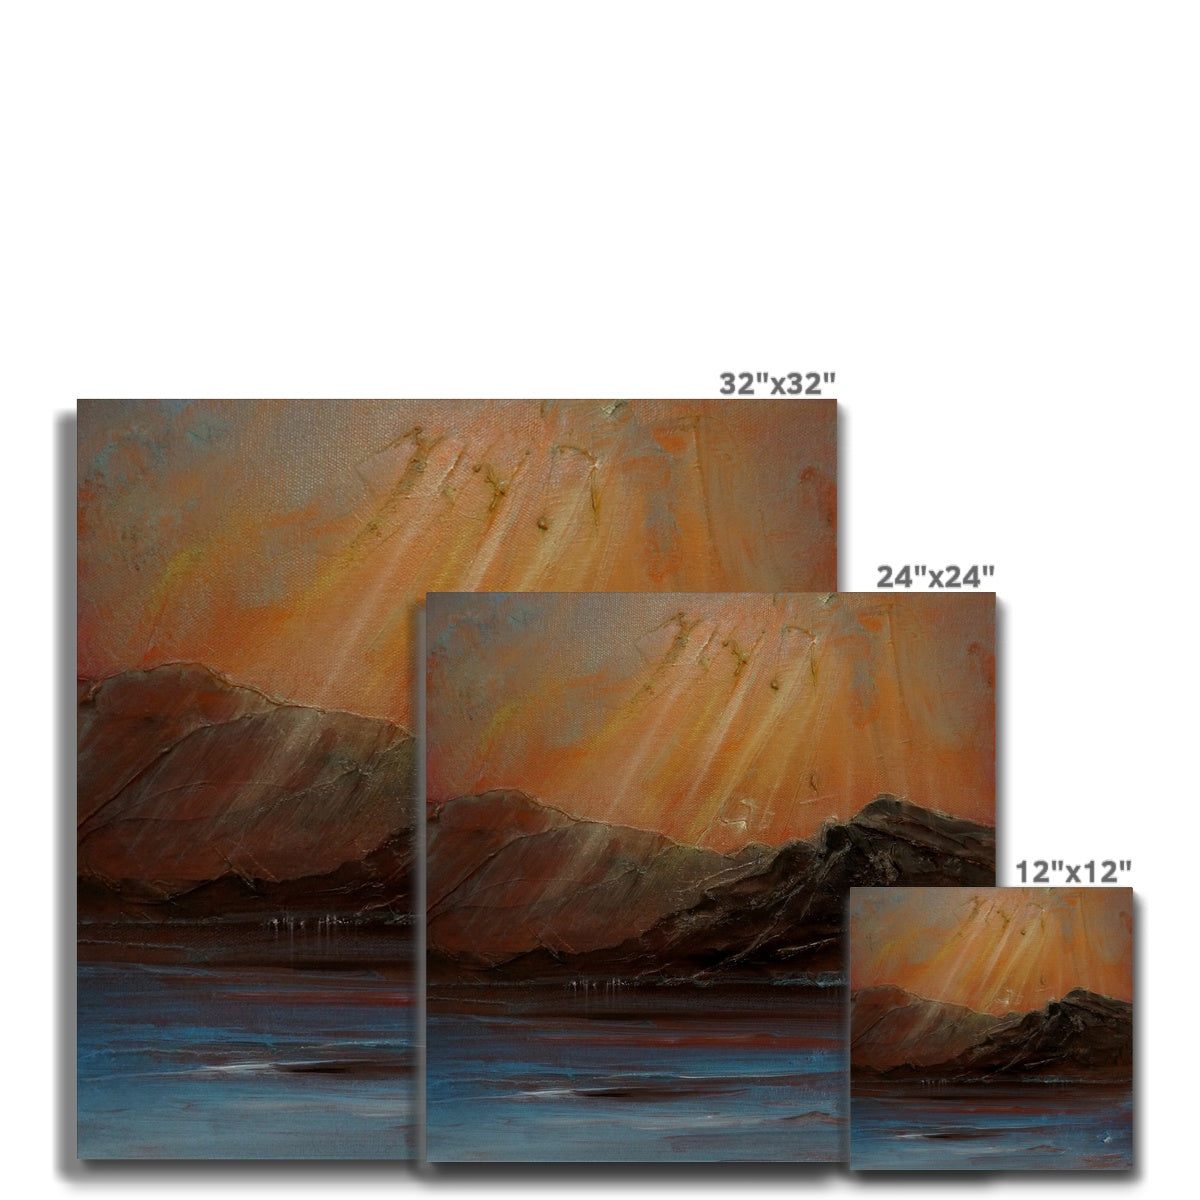 Torridon ii Painting | Canvas From Scotland-Contemporary Stretched Canvas Prints-Scottish Lochs & Mountains Art Gallery-Paintings, Prints, Homeware, Art Gifts From Scotland By Scottish Artist Kevin Hunter